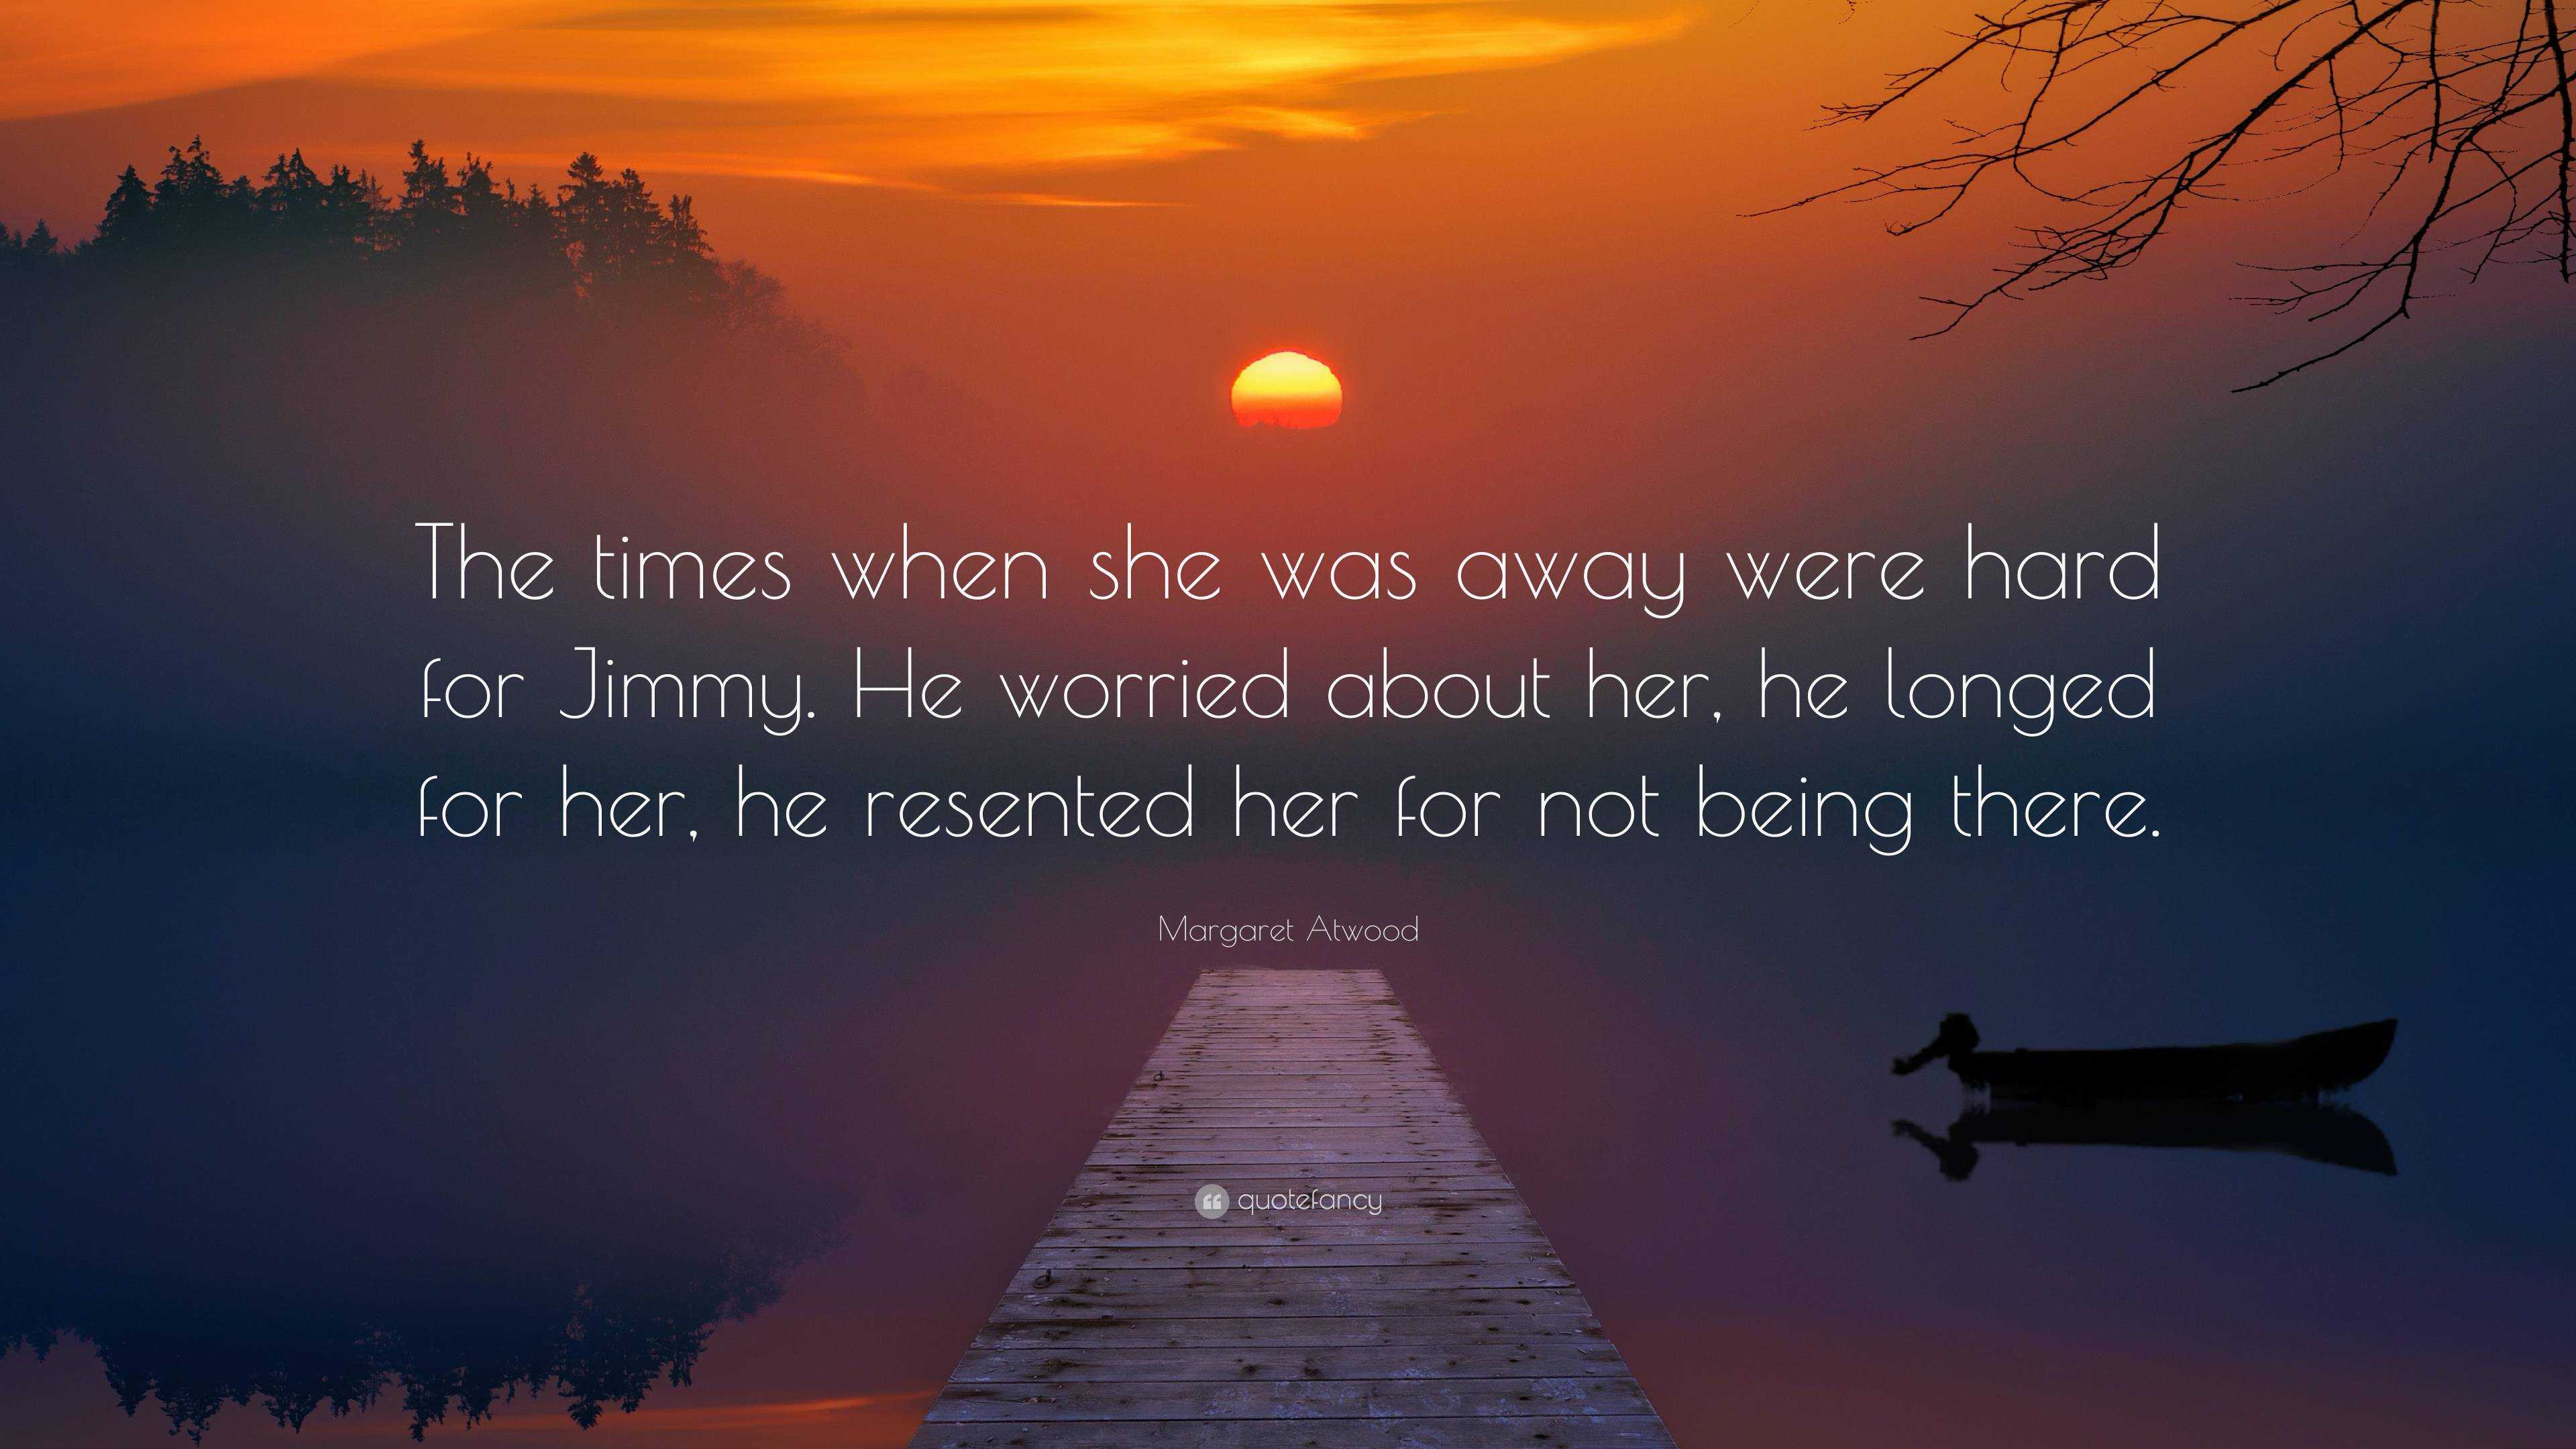 Margaret Atwood Quote: “The times when she was away were hard for Jimmy ...